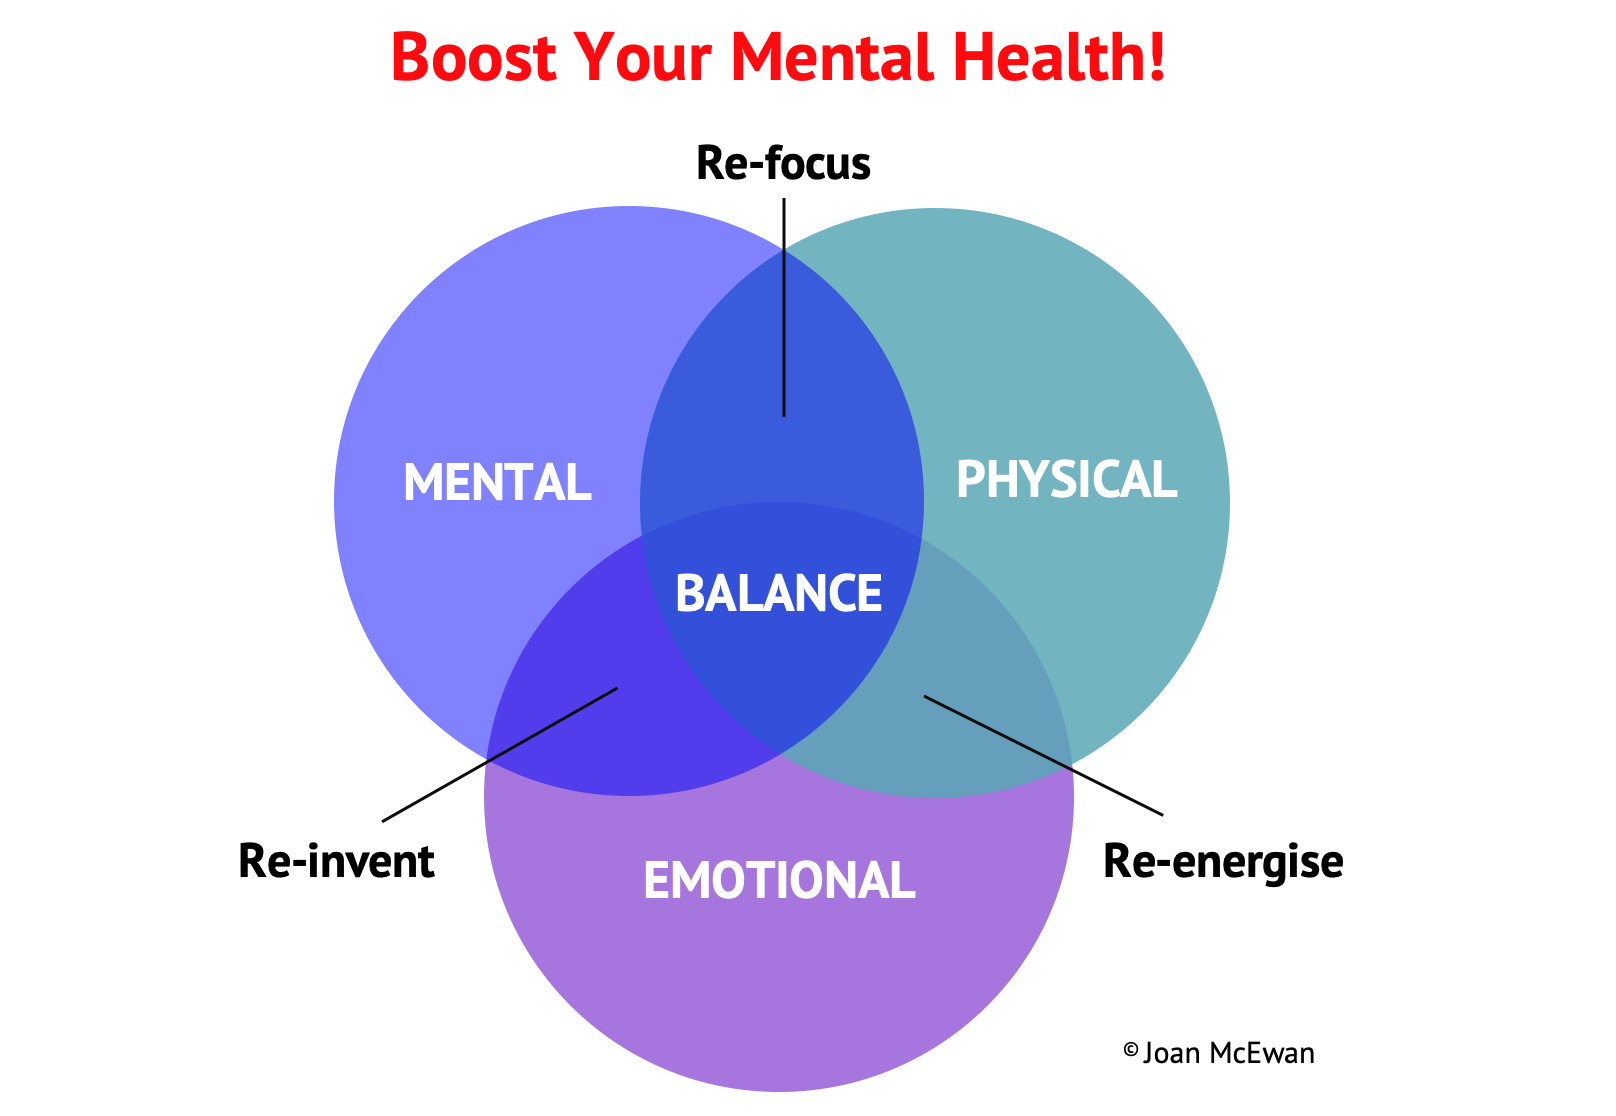 Boost your mental health